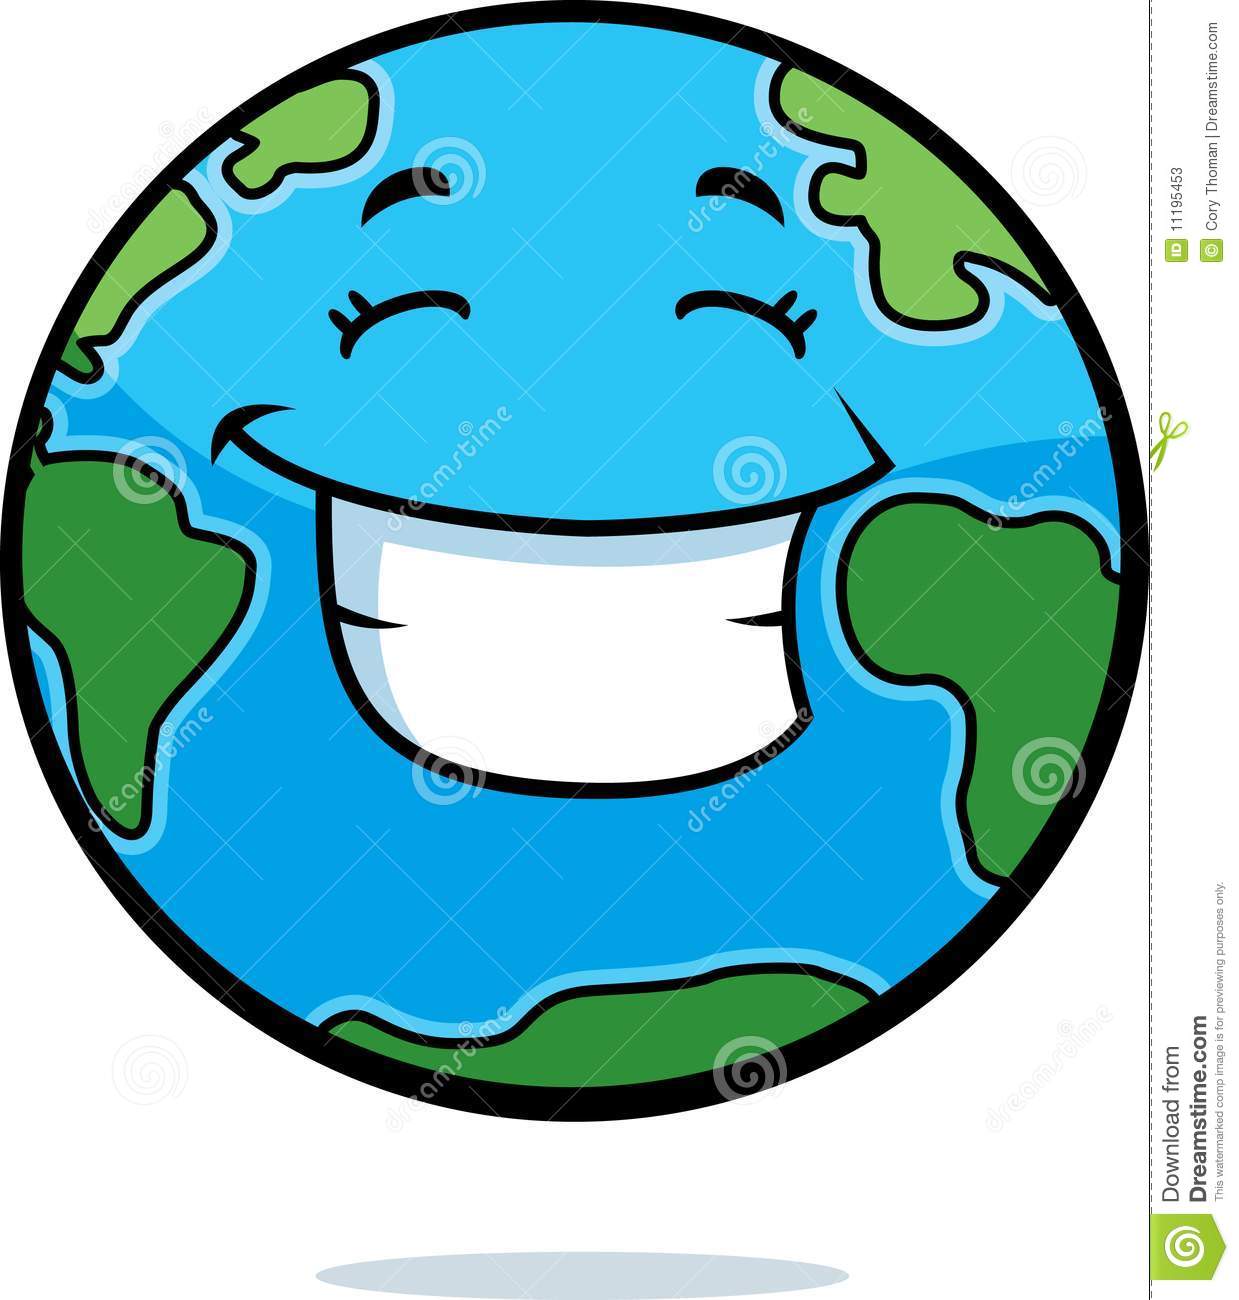 Earth Smiling Stock Photos   Image  11195453